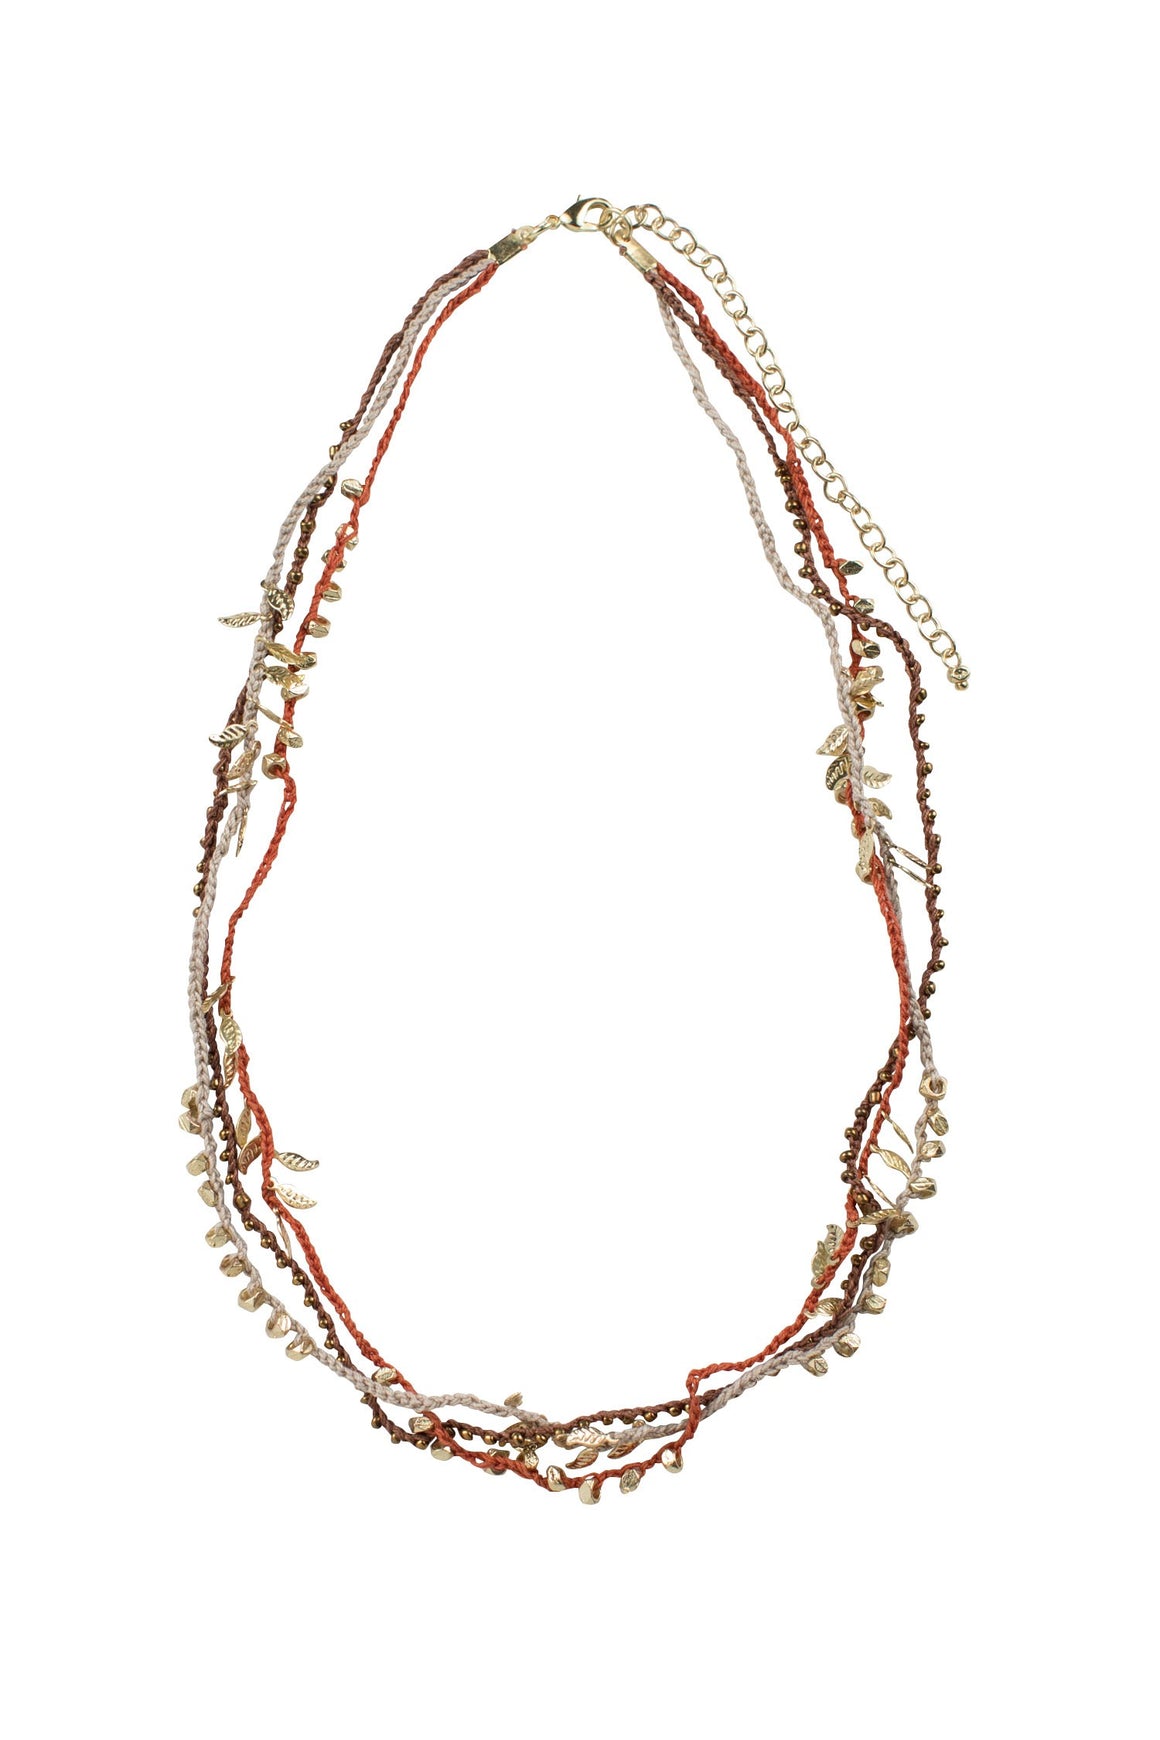 Braided Bits Crochet and Beads Necklace Handcrafted in India